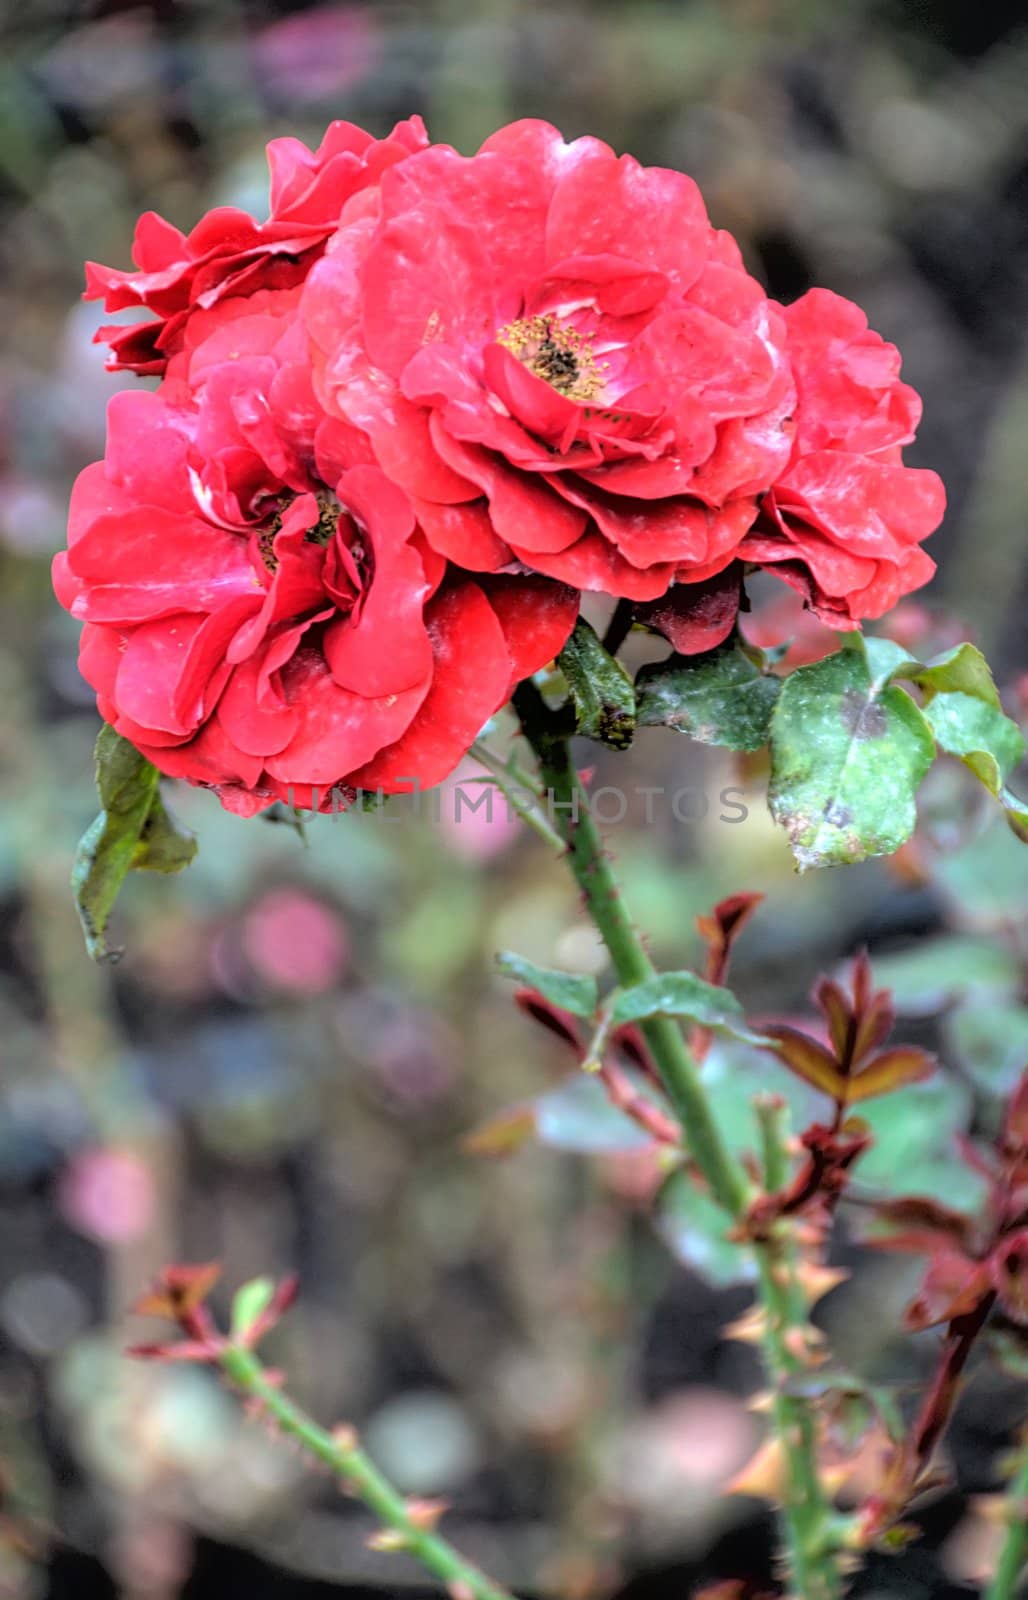 red flowers on blurred background